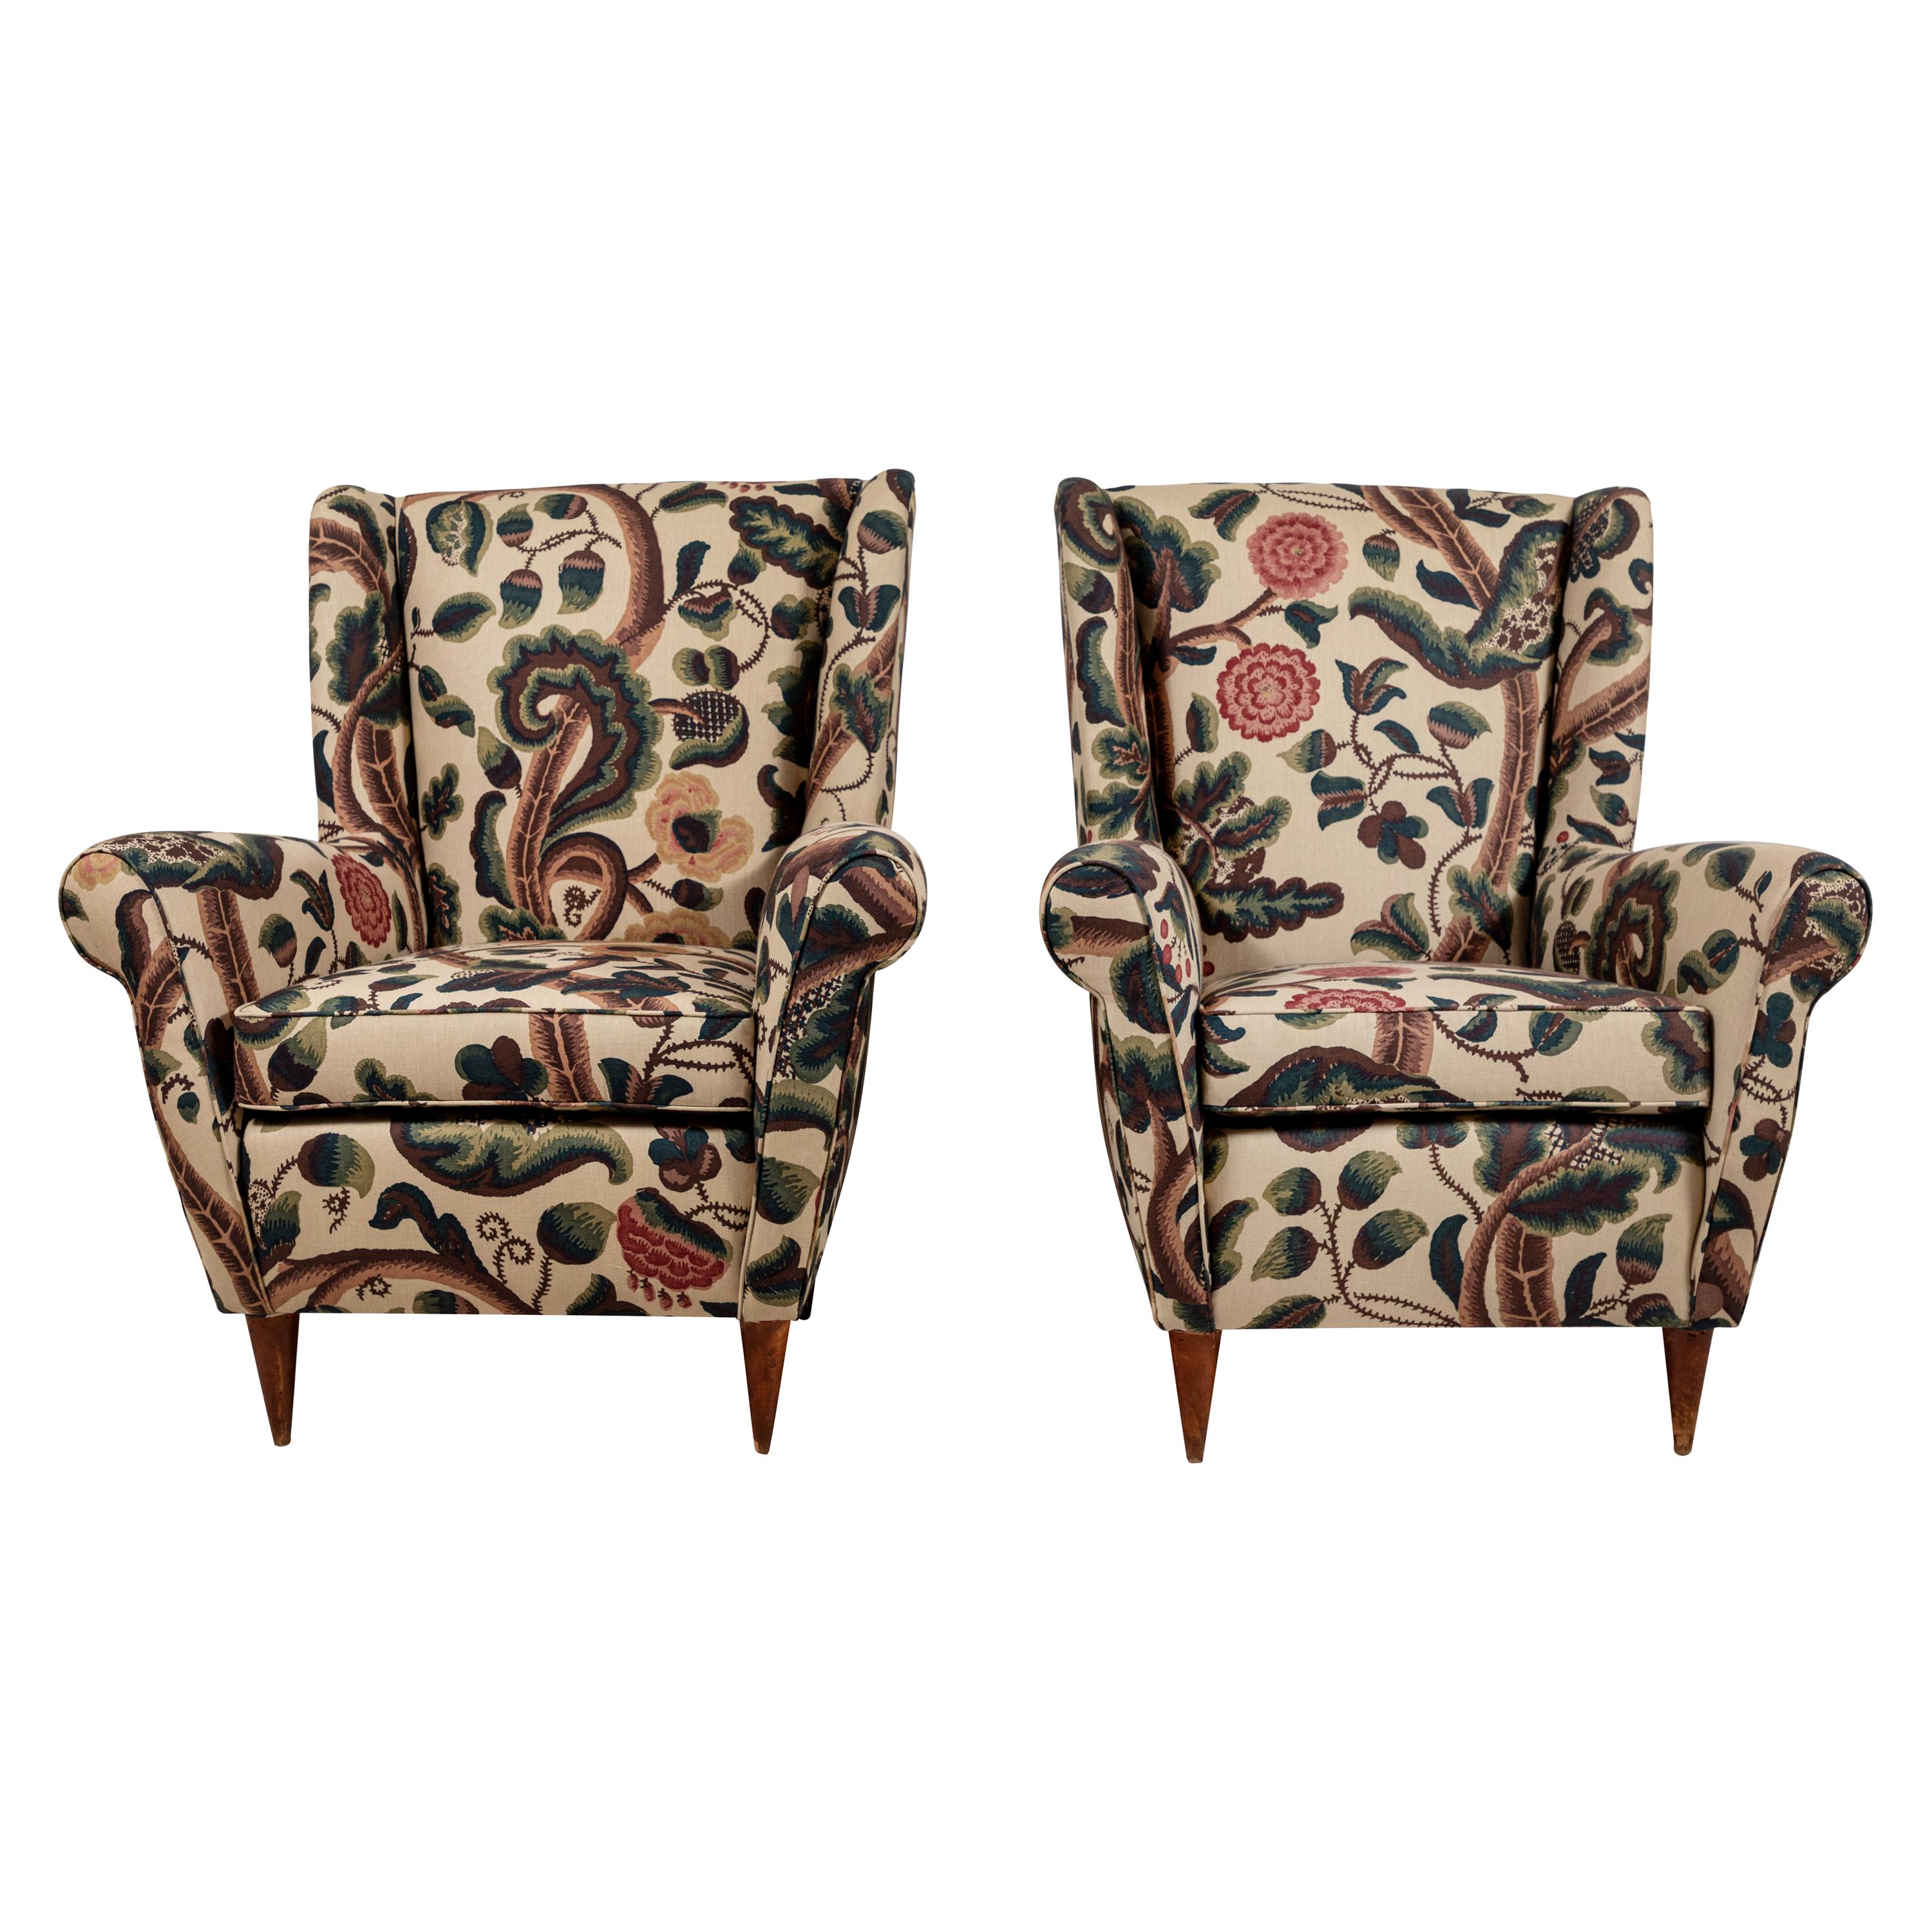 Pair of French Wingback Chairs upholstered in Floral Fabric